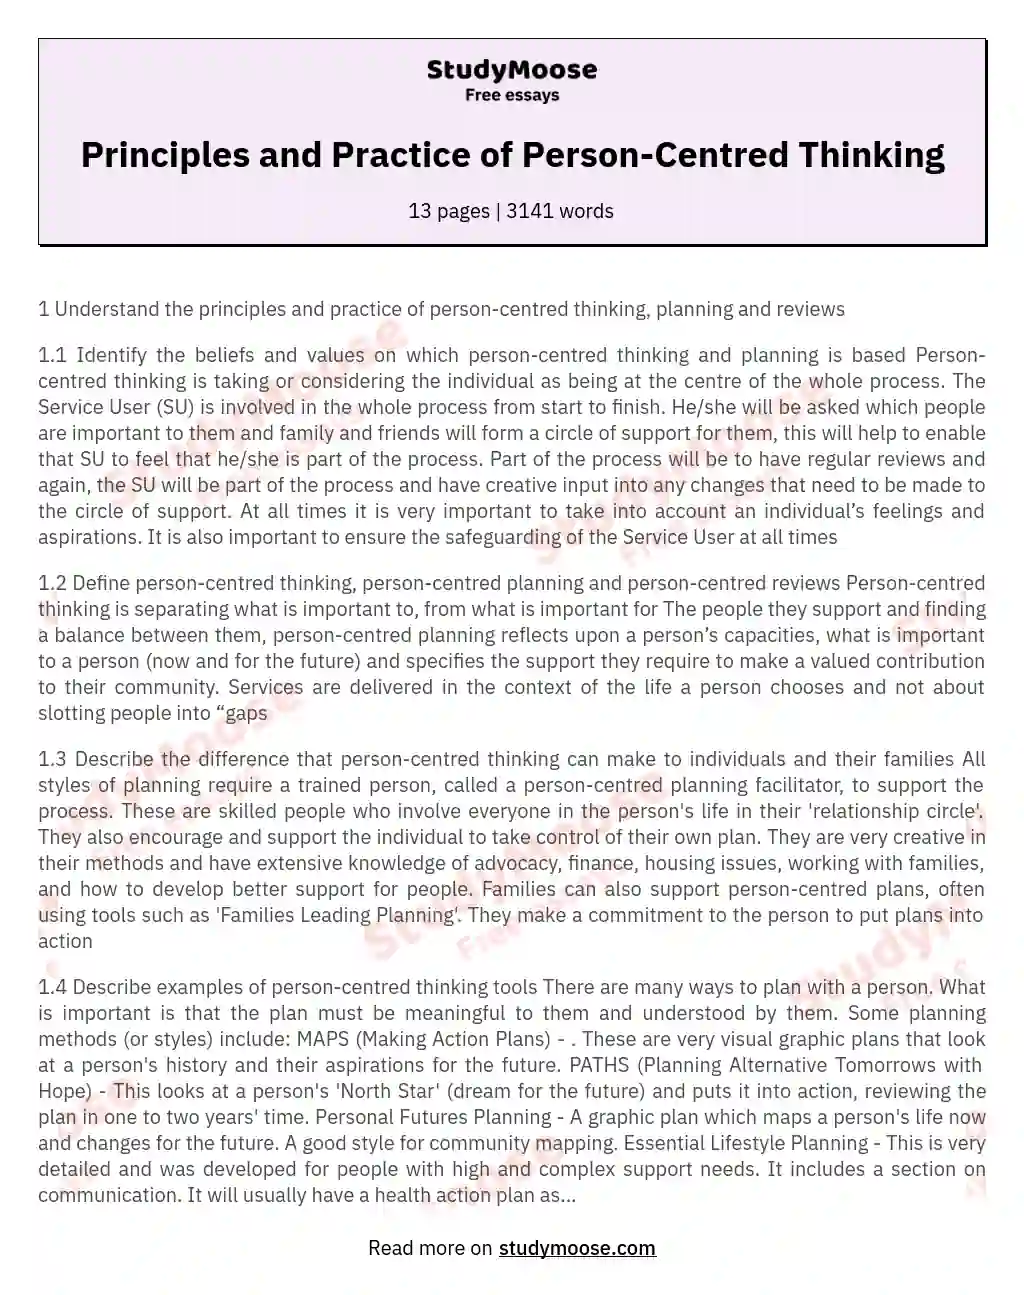 Principles and Practice of Person-Centred Thinking essay